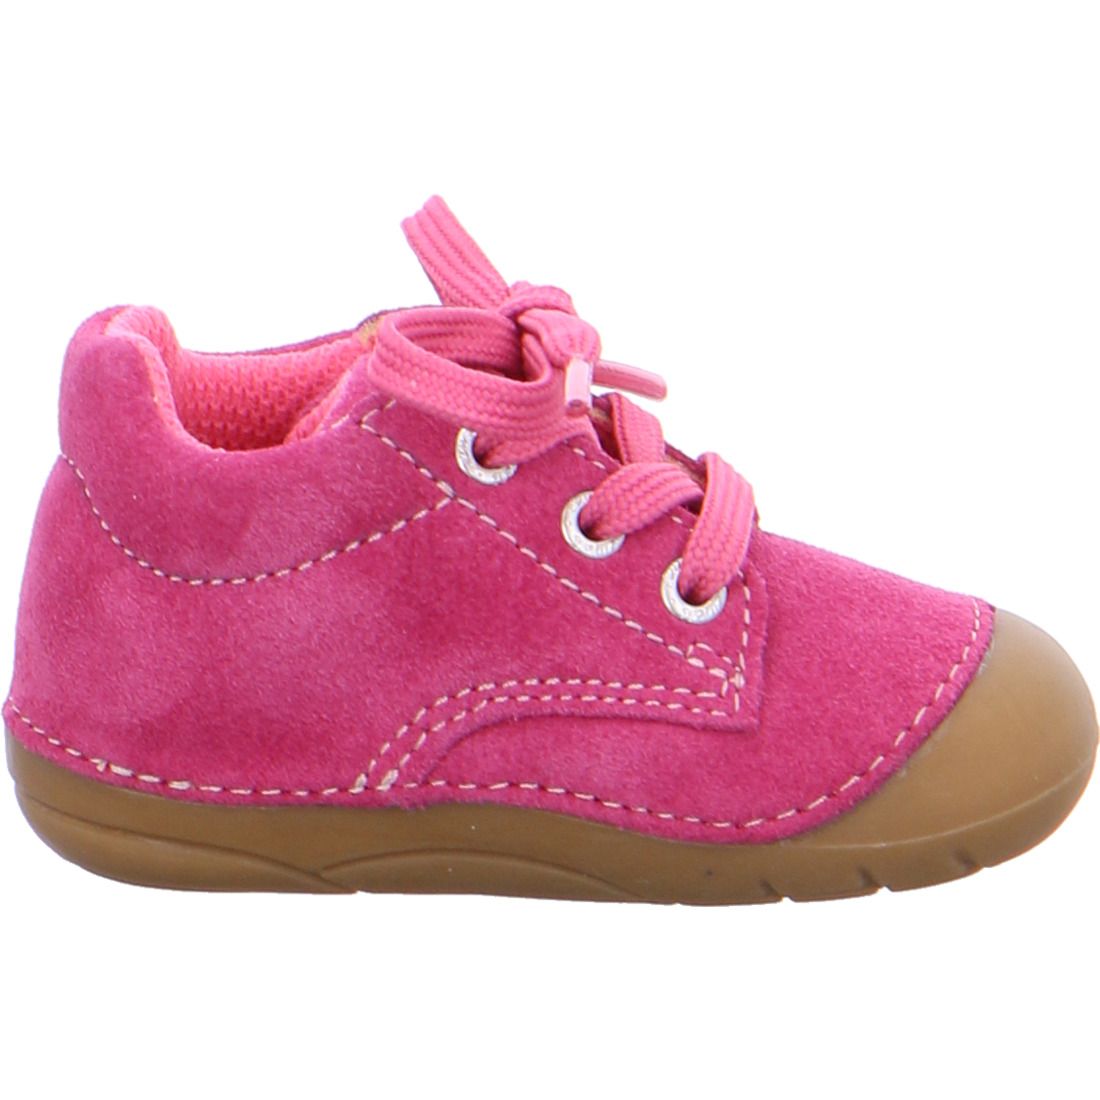 Lurchi barefoot boty - Flo suede pink